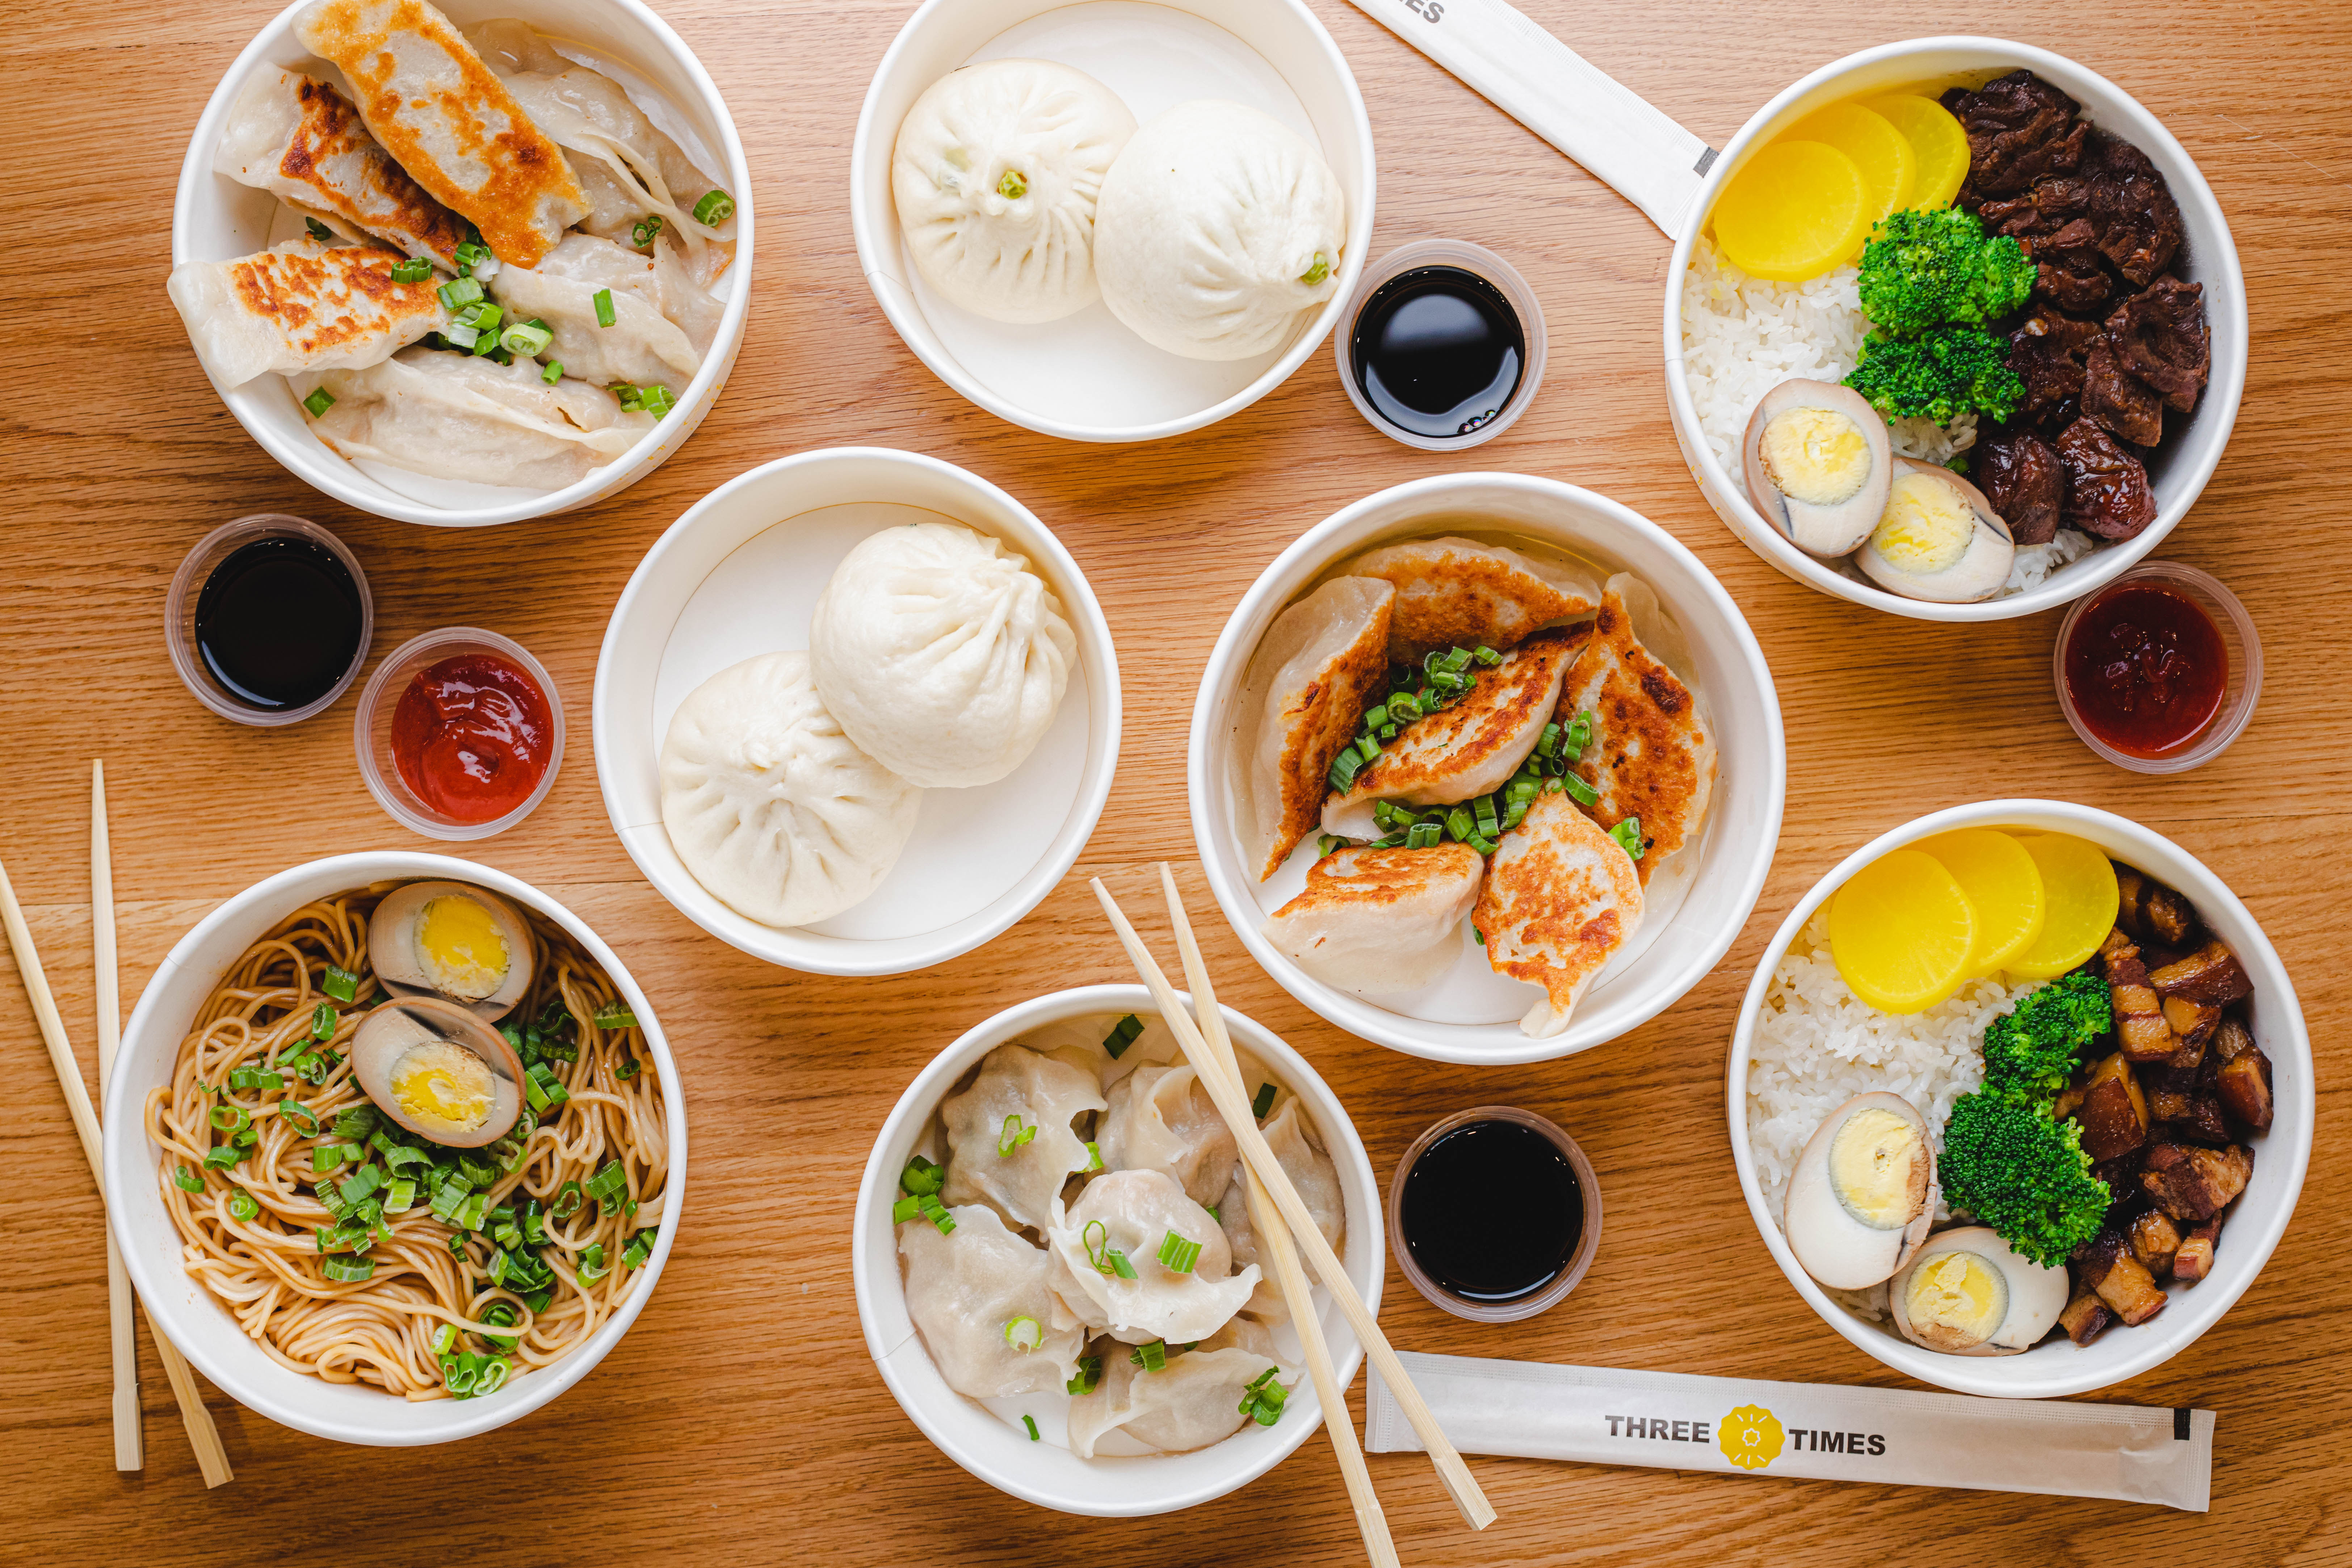 A spread of plated Chinese dishes like noodles and dumplings